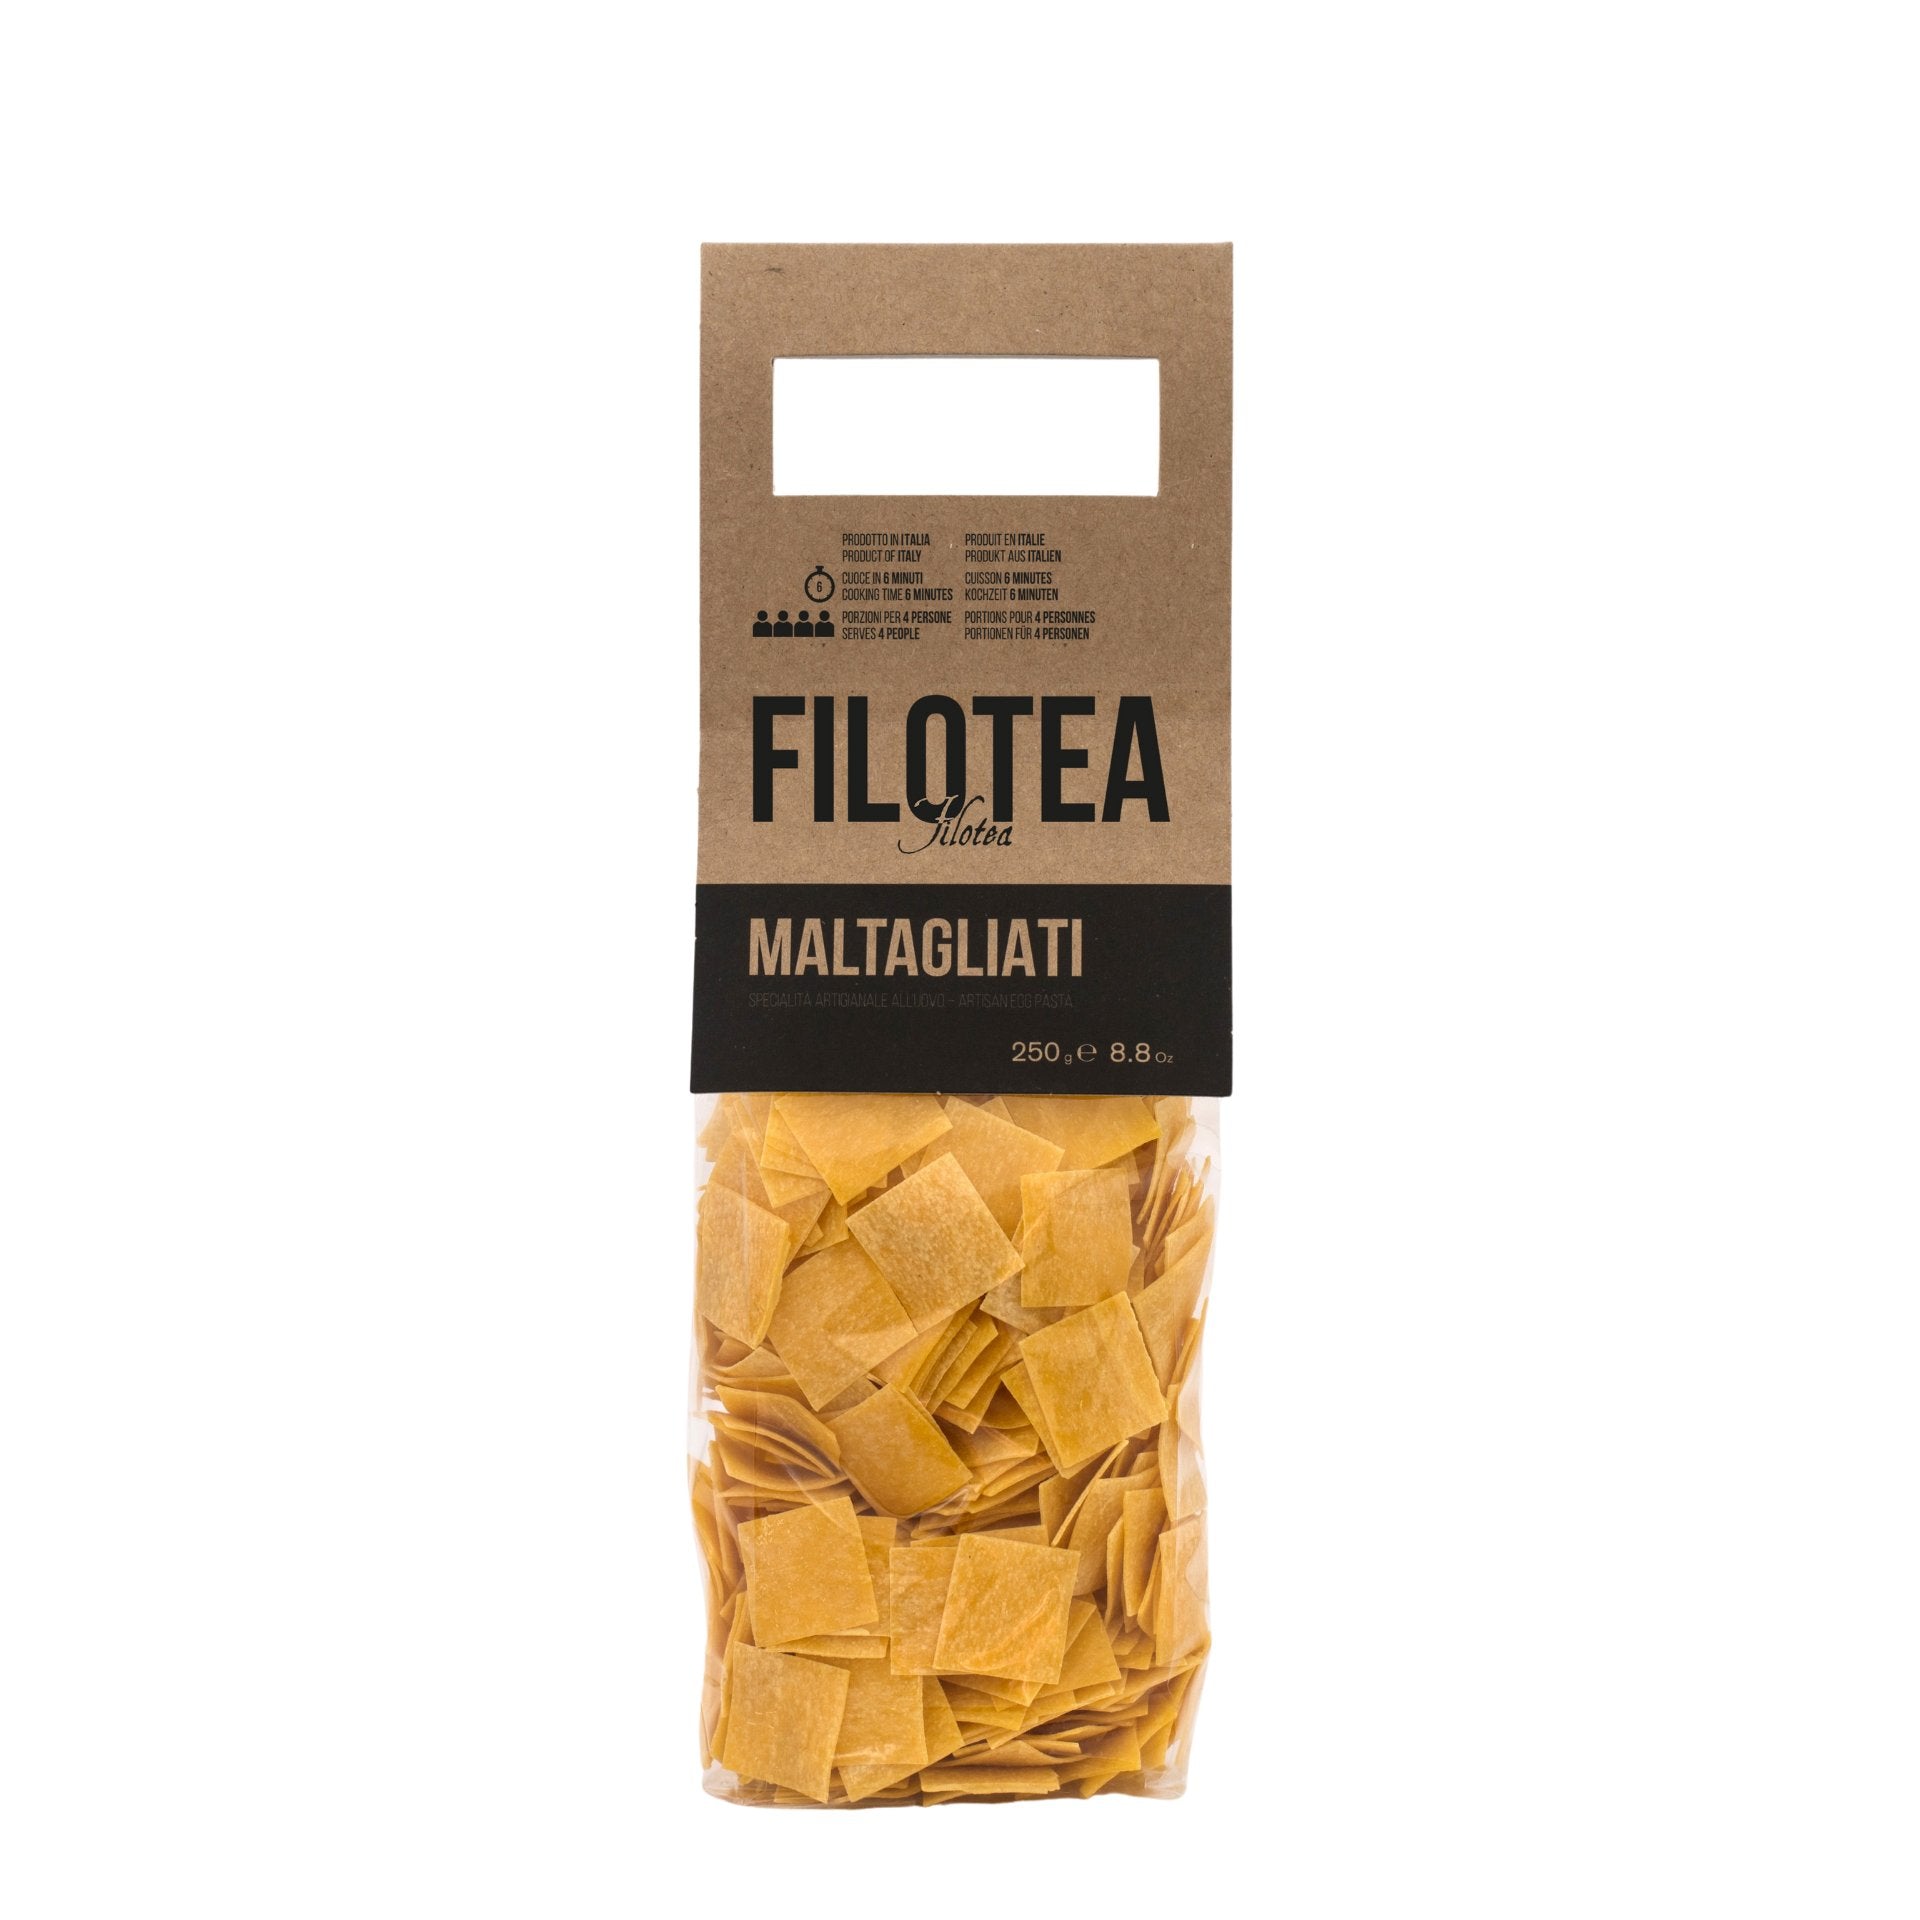 Filotea Maltagliati Artisan Egg Pasta 250g  | Imported and distributed in the UK by Just Gourmet Foods